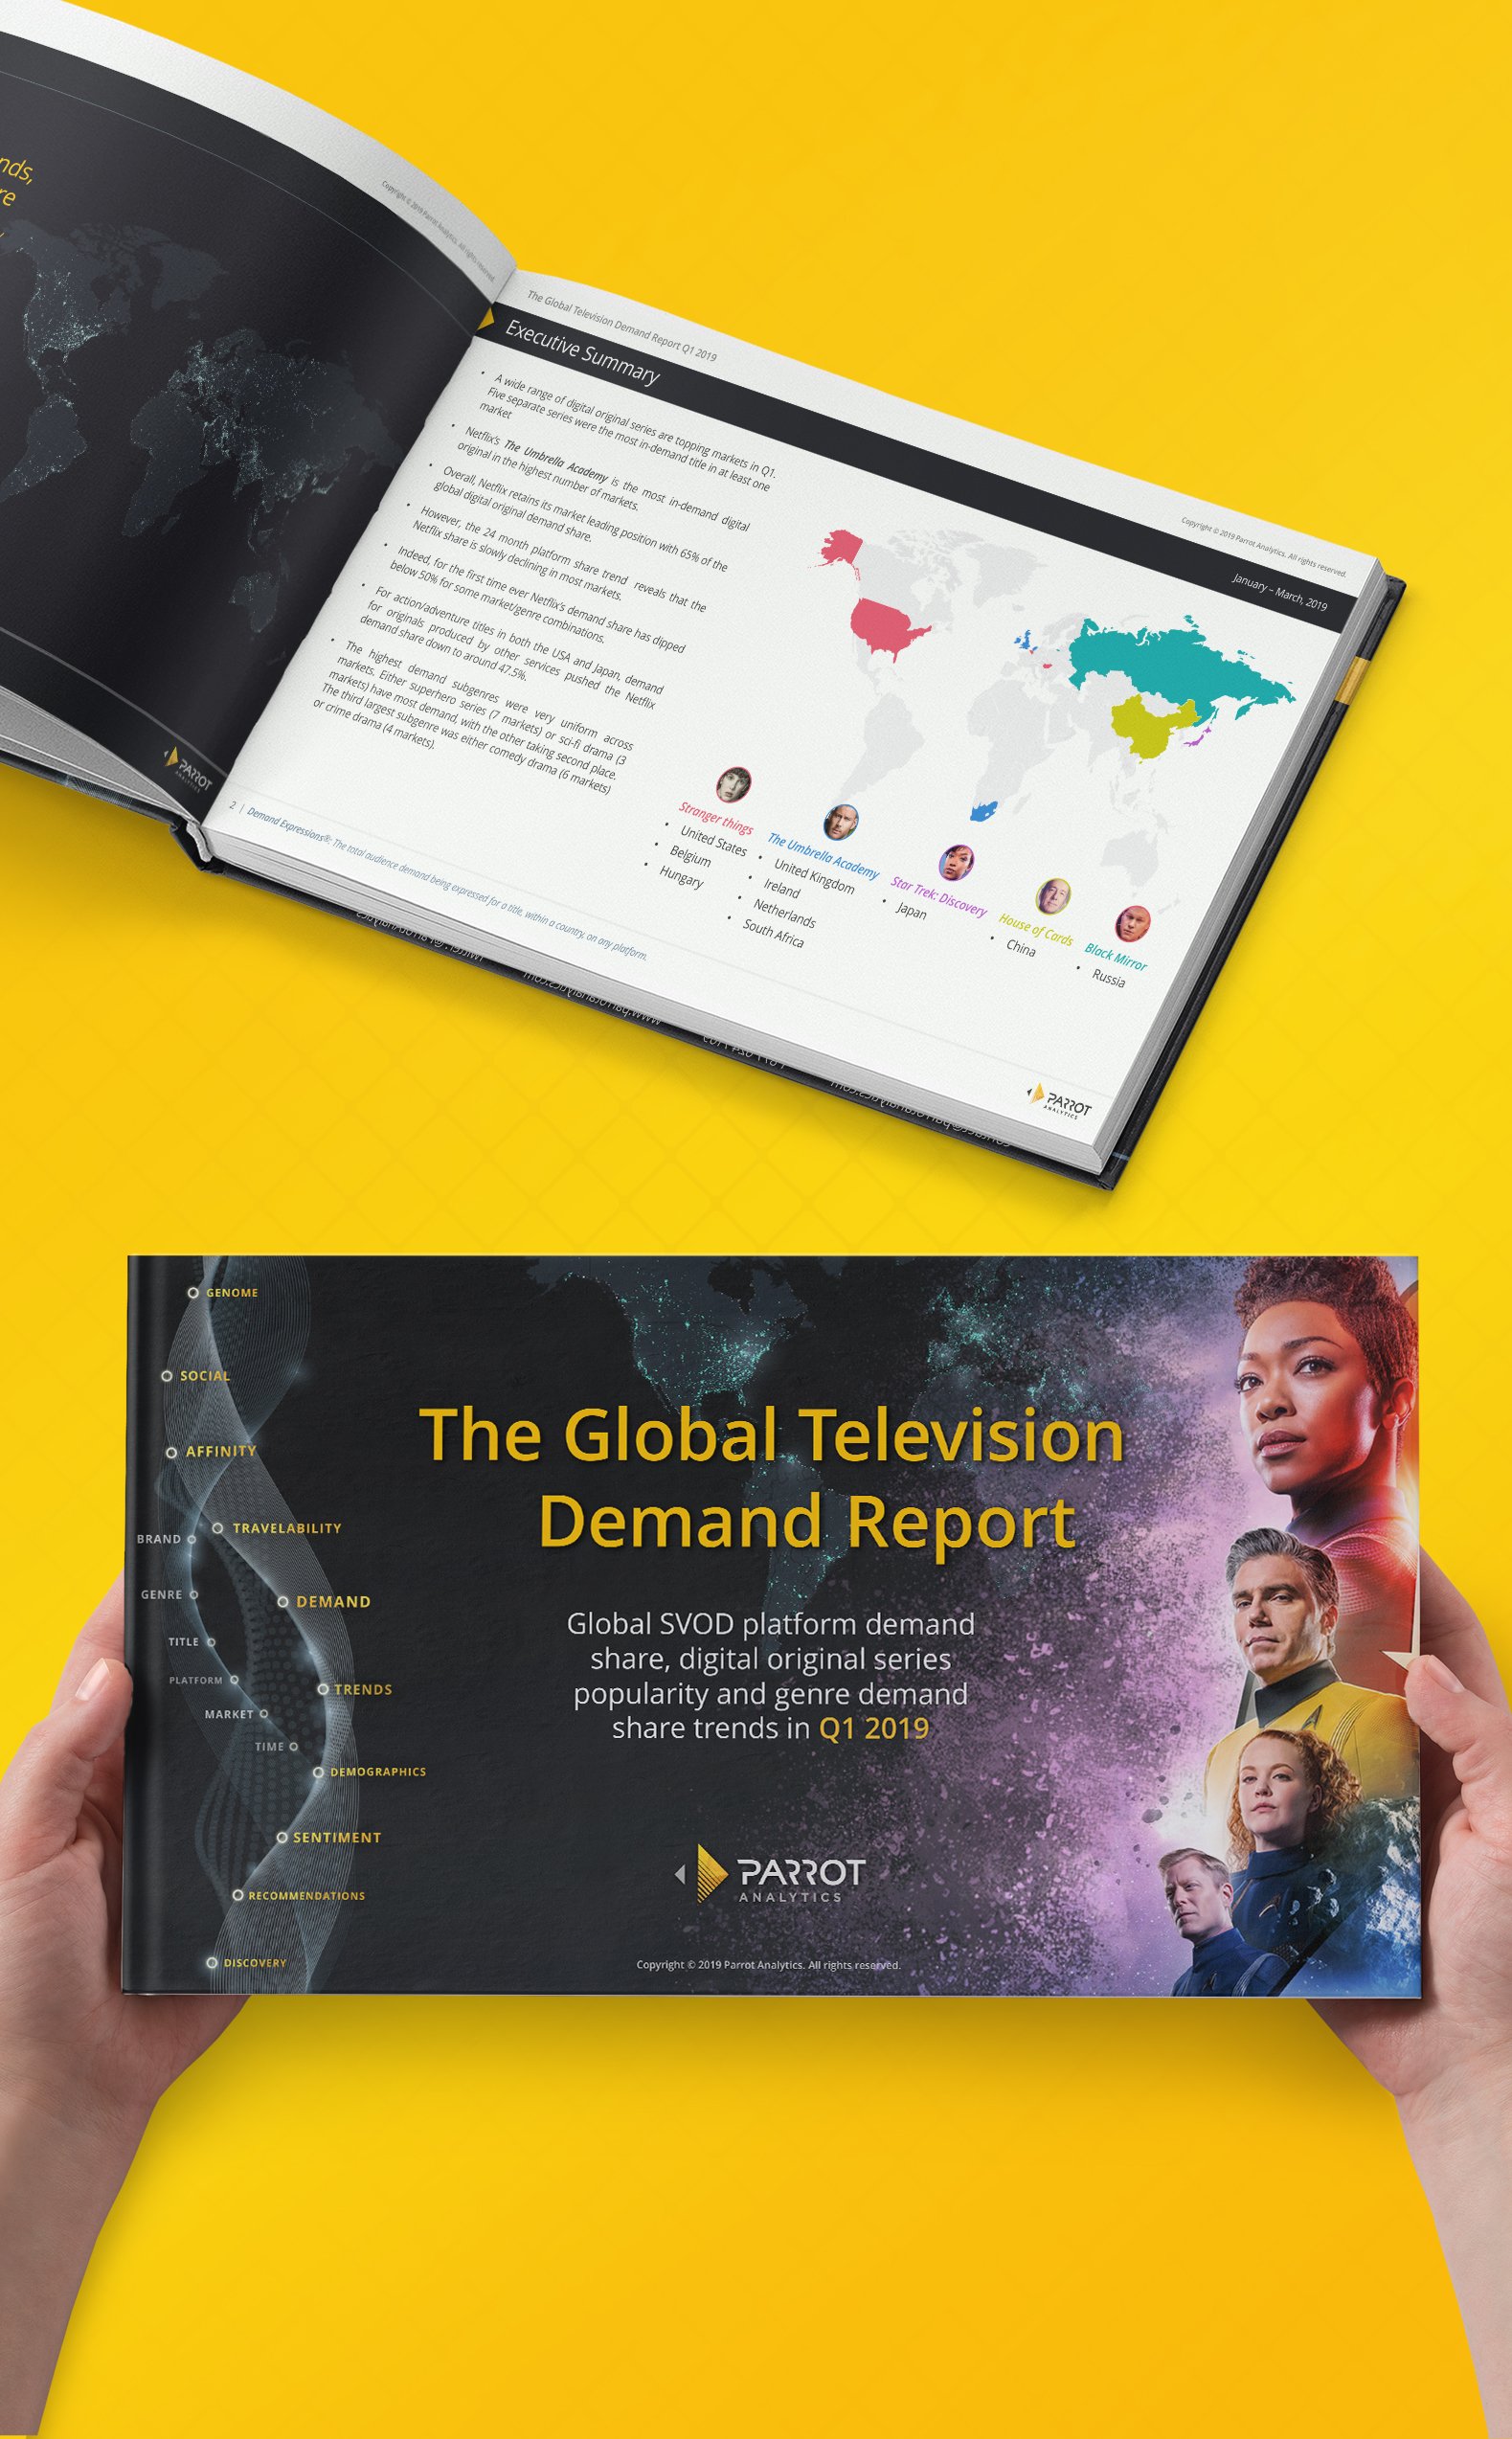 The Global Television Demand Report 2019